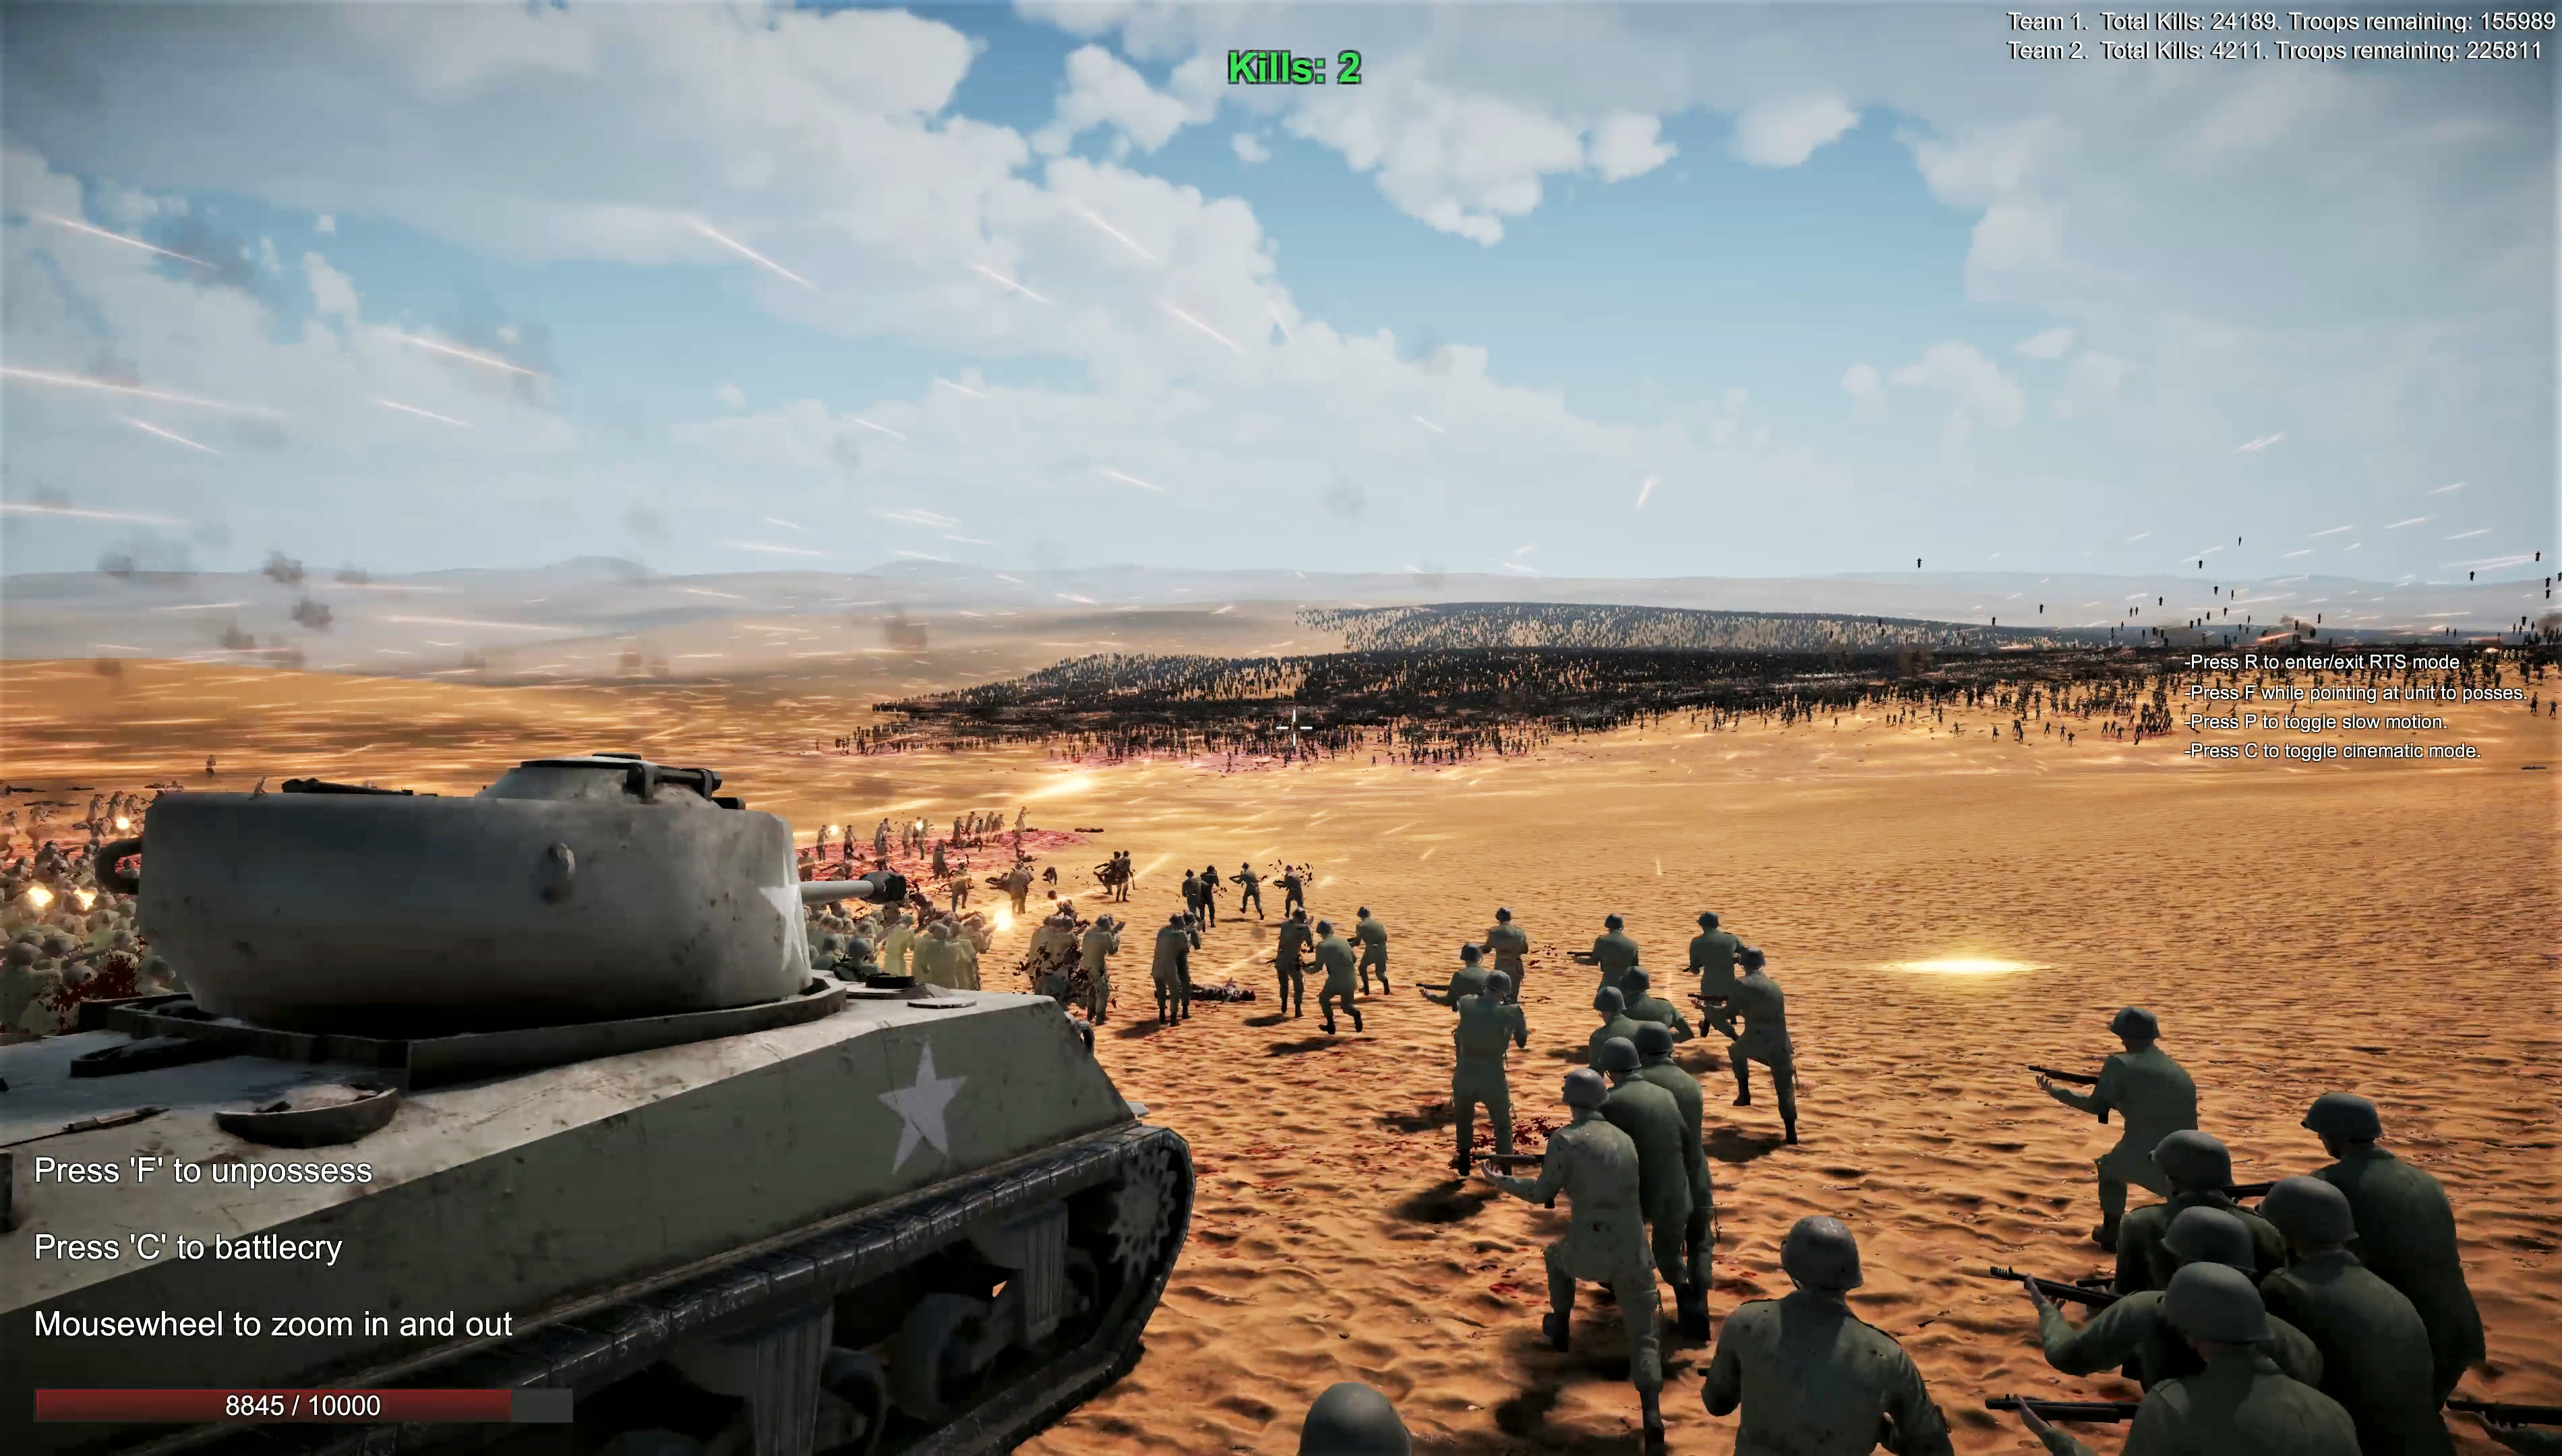 Ultimate Epic Battle Simulator 2 Free Download for PC